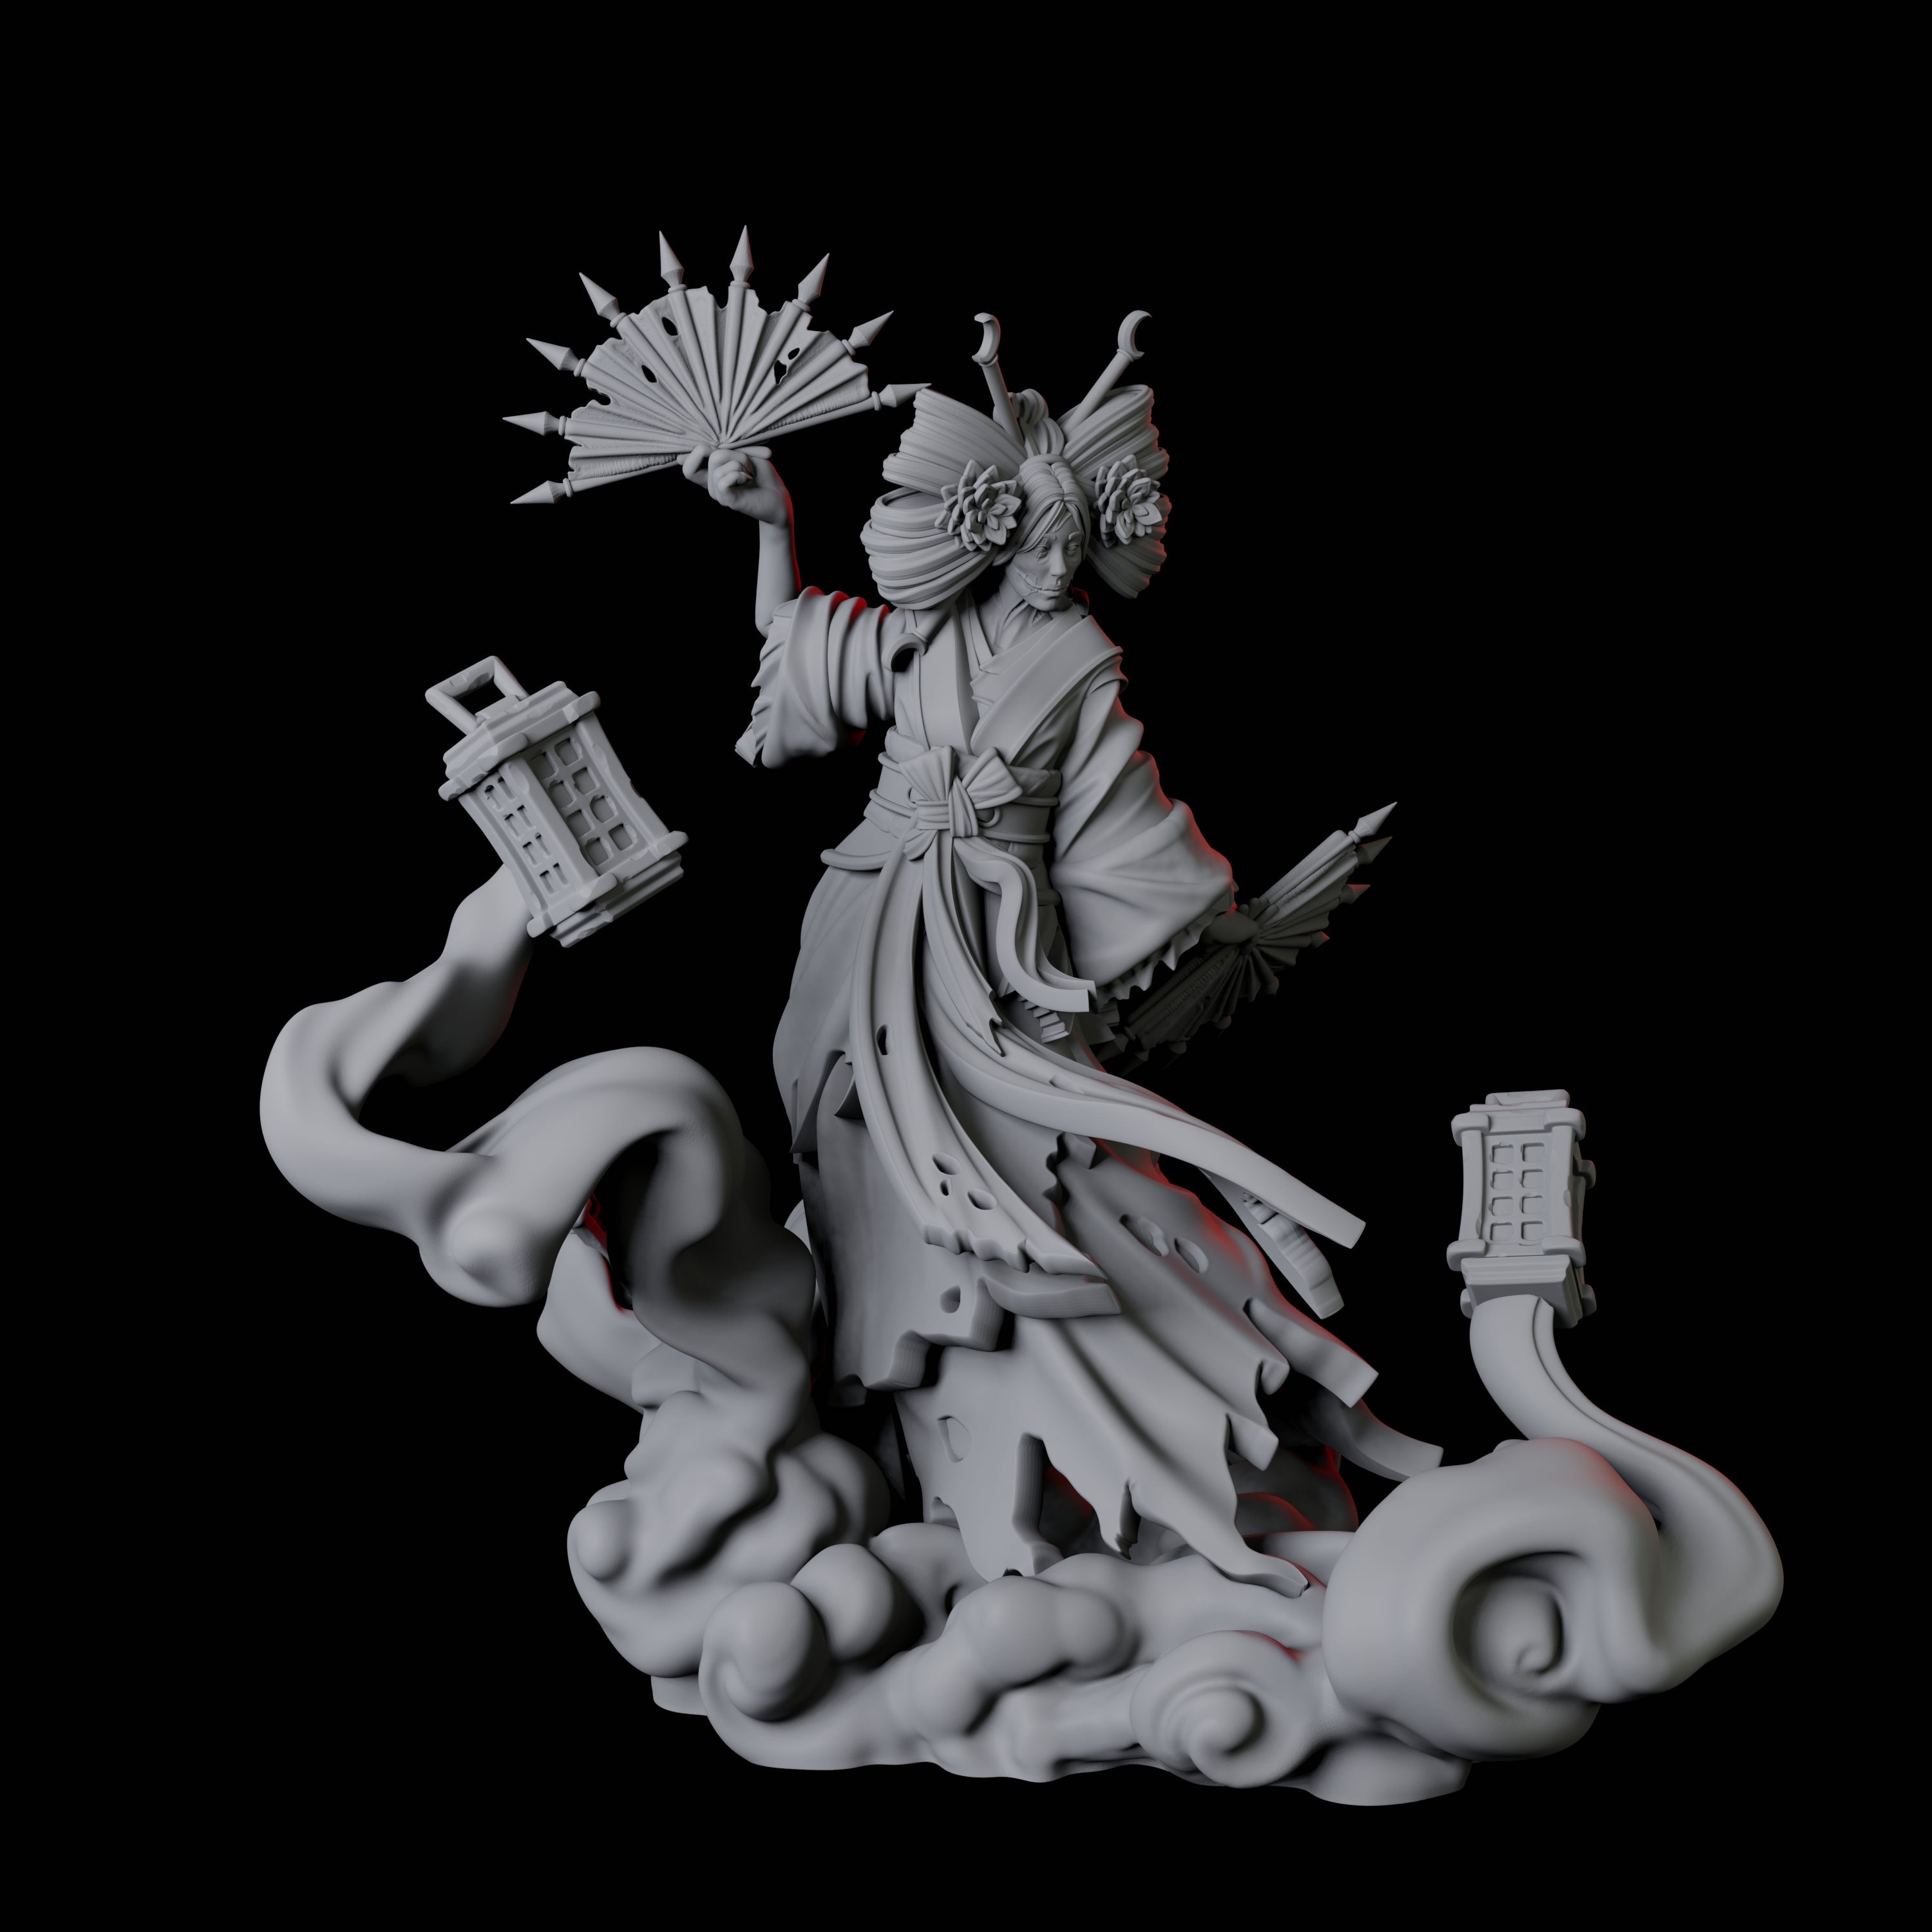 Mysterious Geisha Sorcerer B Miniature for Dungeons and Dragons, Pathfinder or other TTRPGs